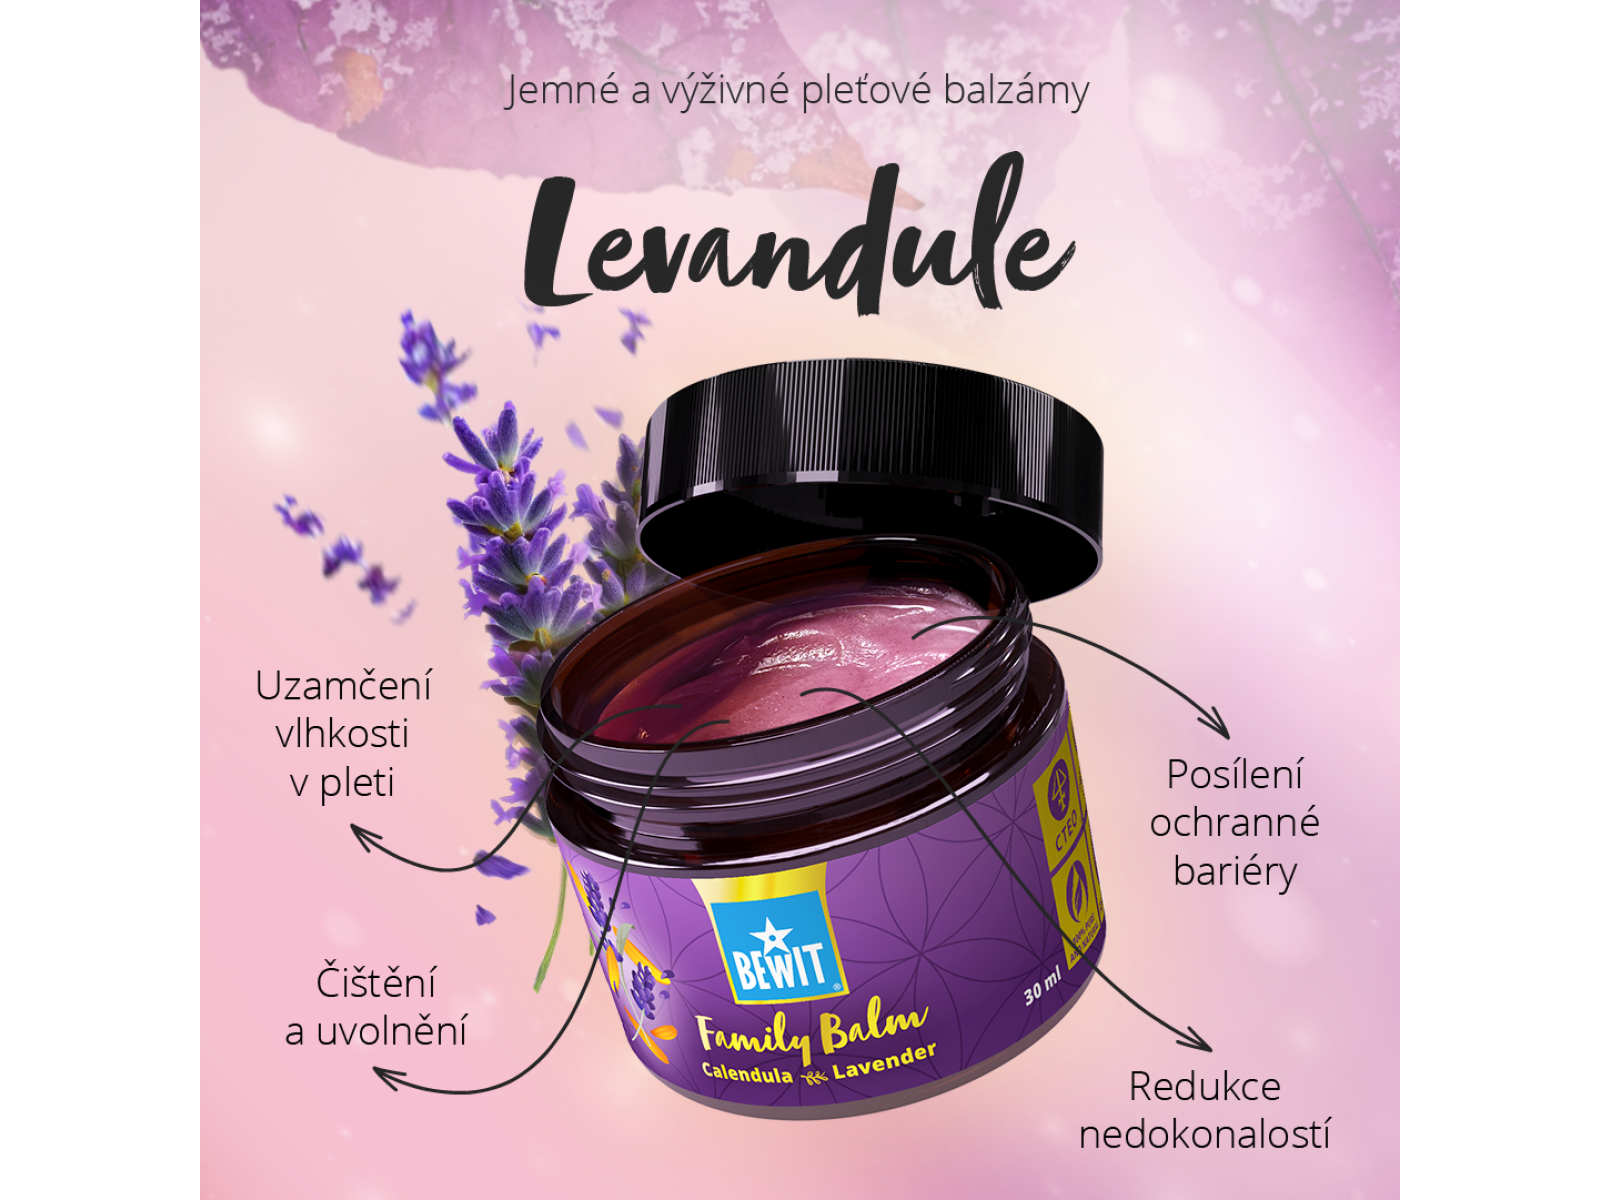 BEWIT FAMILY BALM CALENDULA AND LAVENDER - CARING BALM FOR THE WHOLE FAMILY - 6